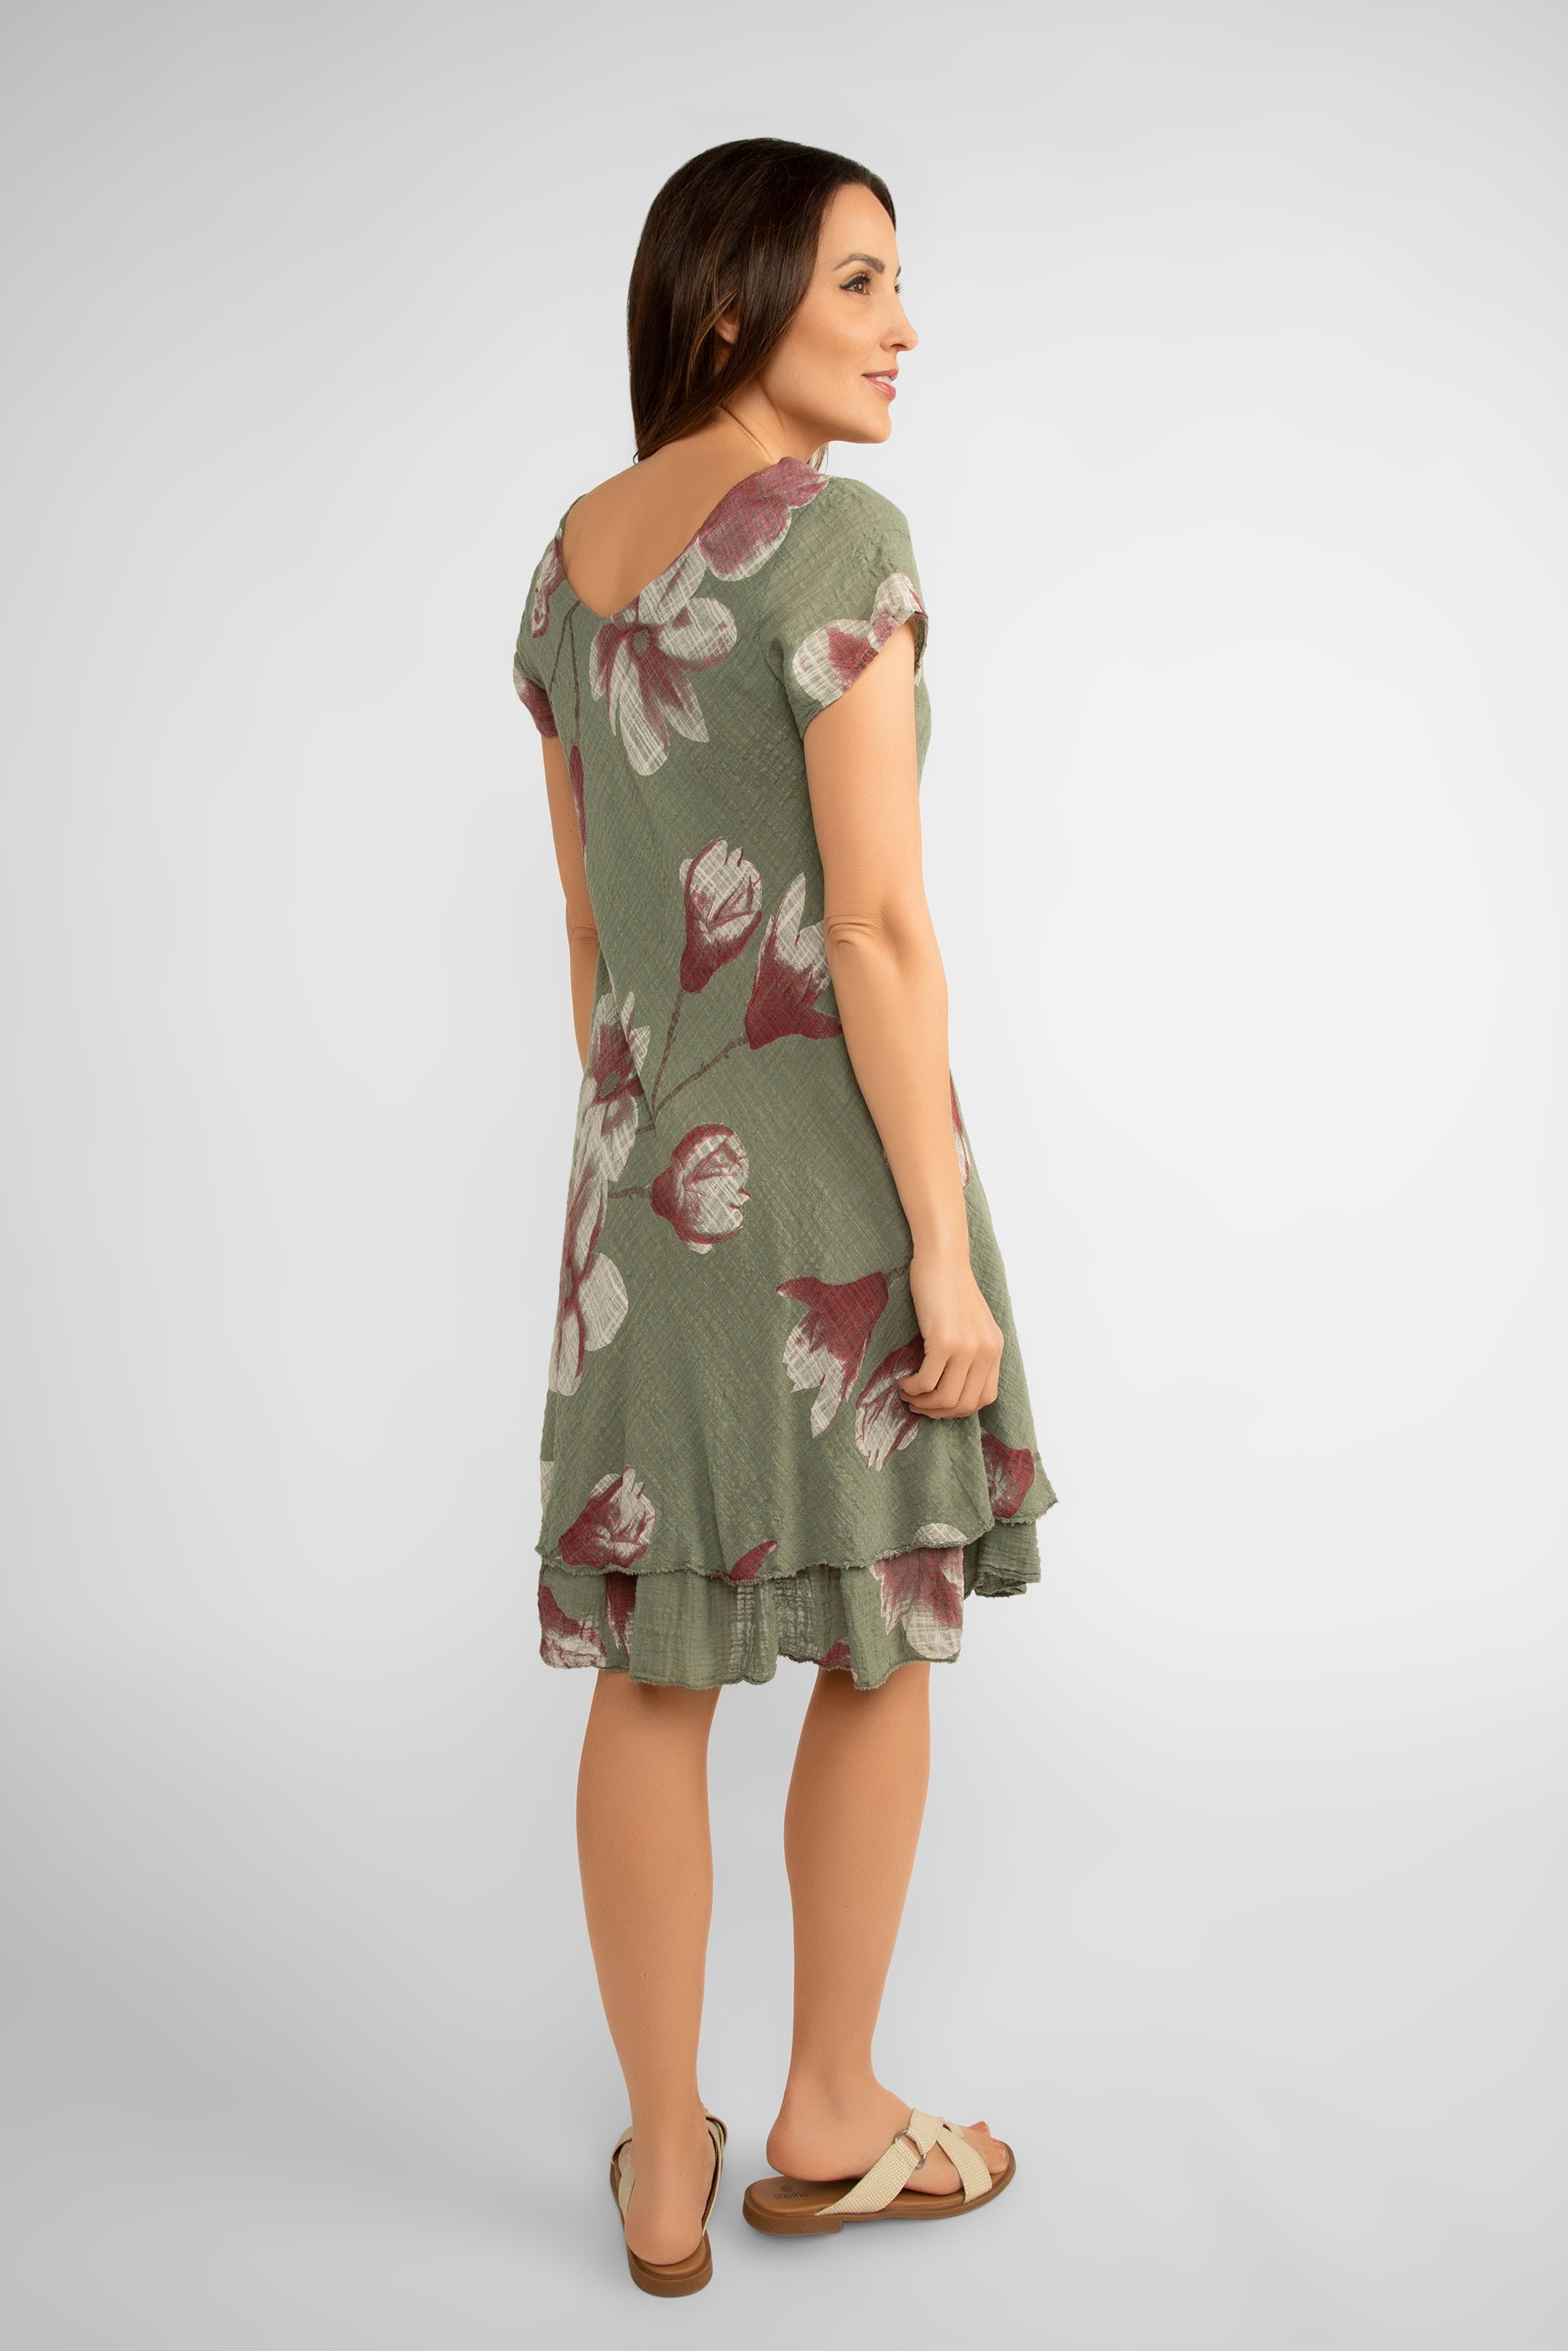 Back view of Bella Amore (6859A) Women's Short Sleeve V-Neck Knee Length Cotton Dress with Tiered Skirt in Military Green and Pink Florals